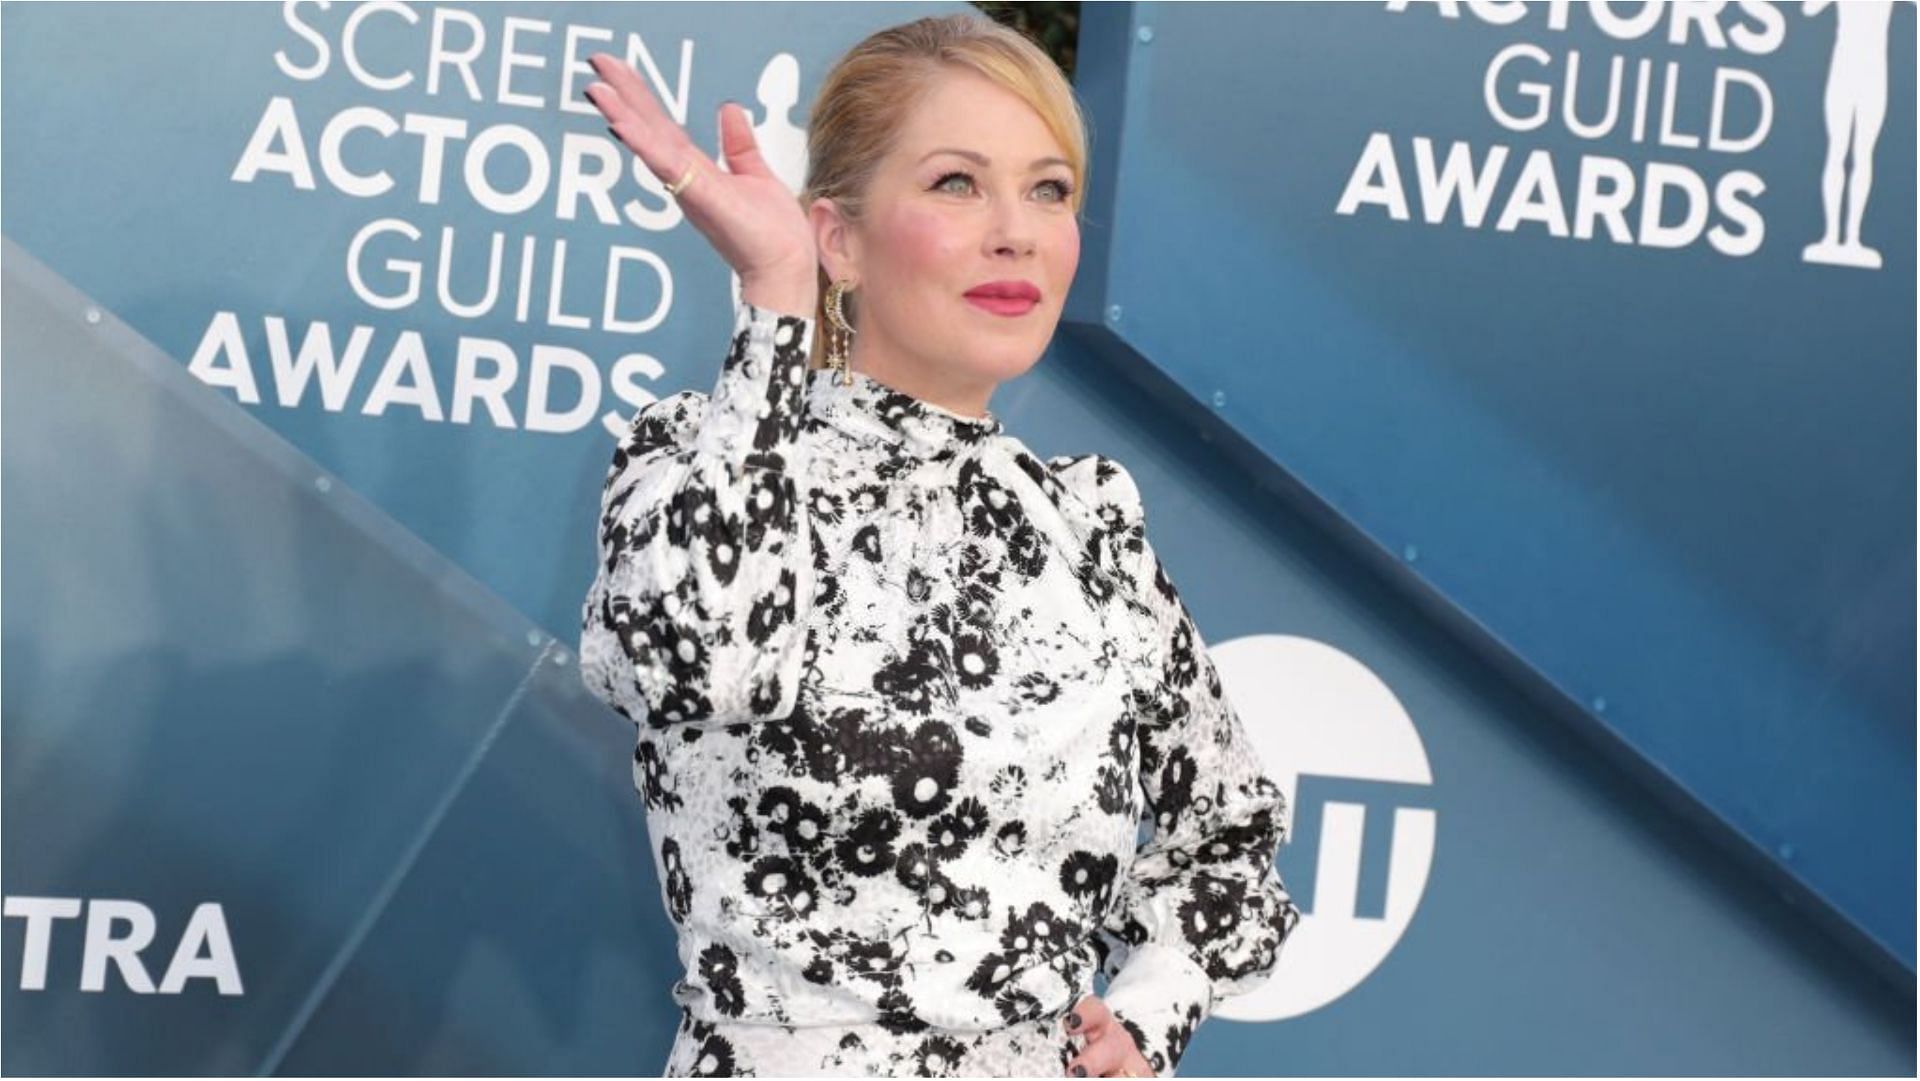 Christina Applegate went out for the first time after being diagnosed with MS in 2021 (Image via Leon Bennett/Getty Images)